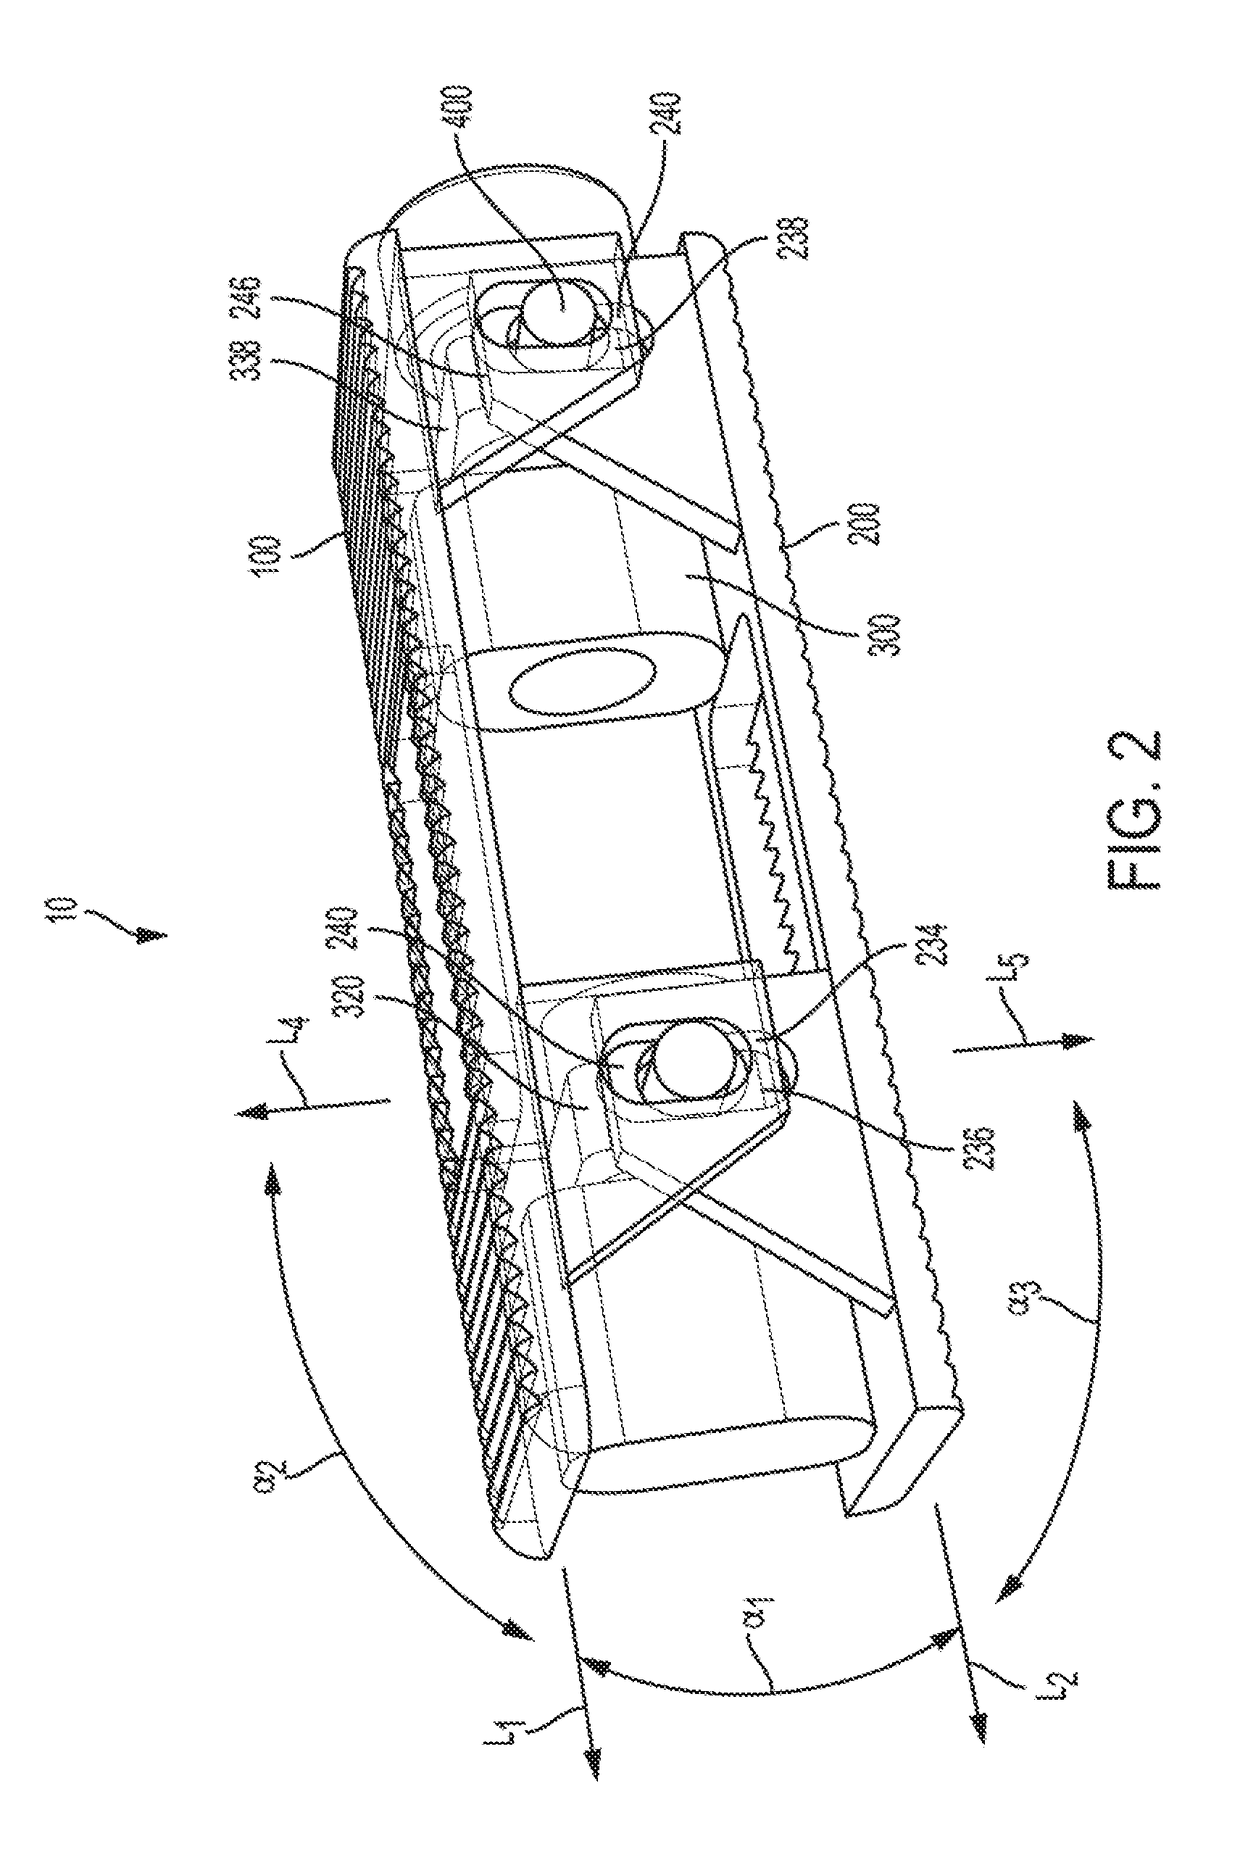 Expandable, adjustable inter-body fusion devices and methods